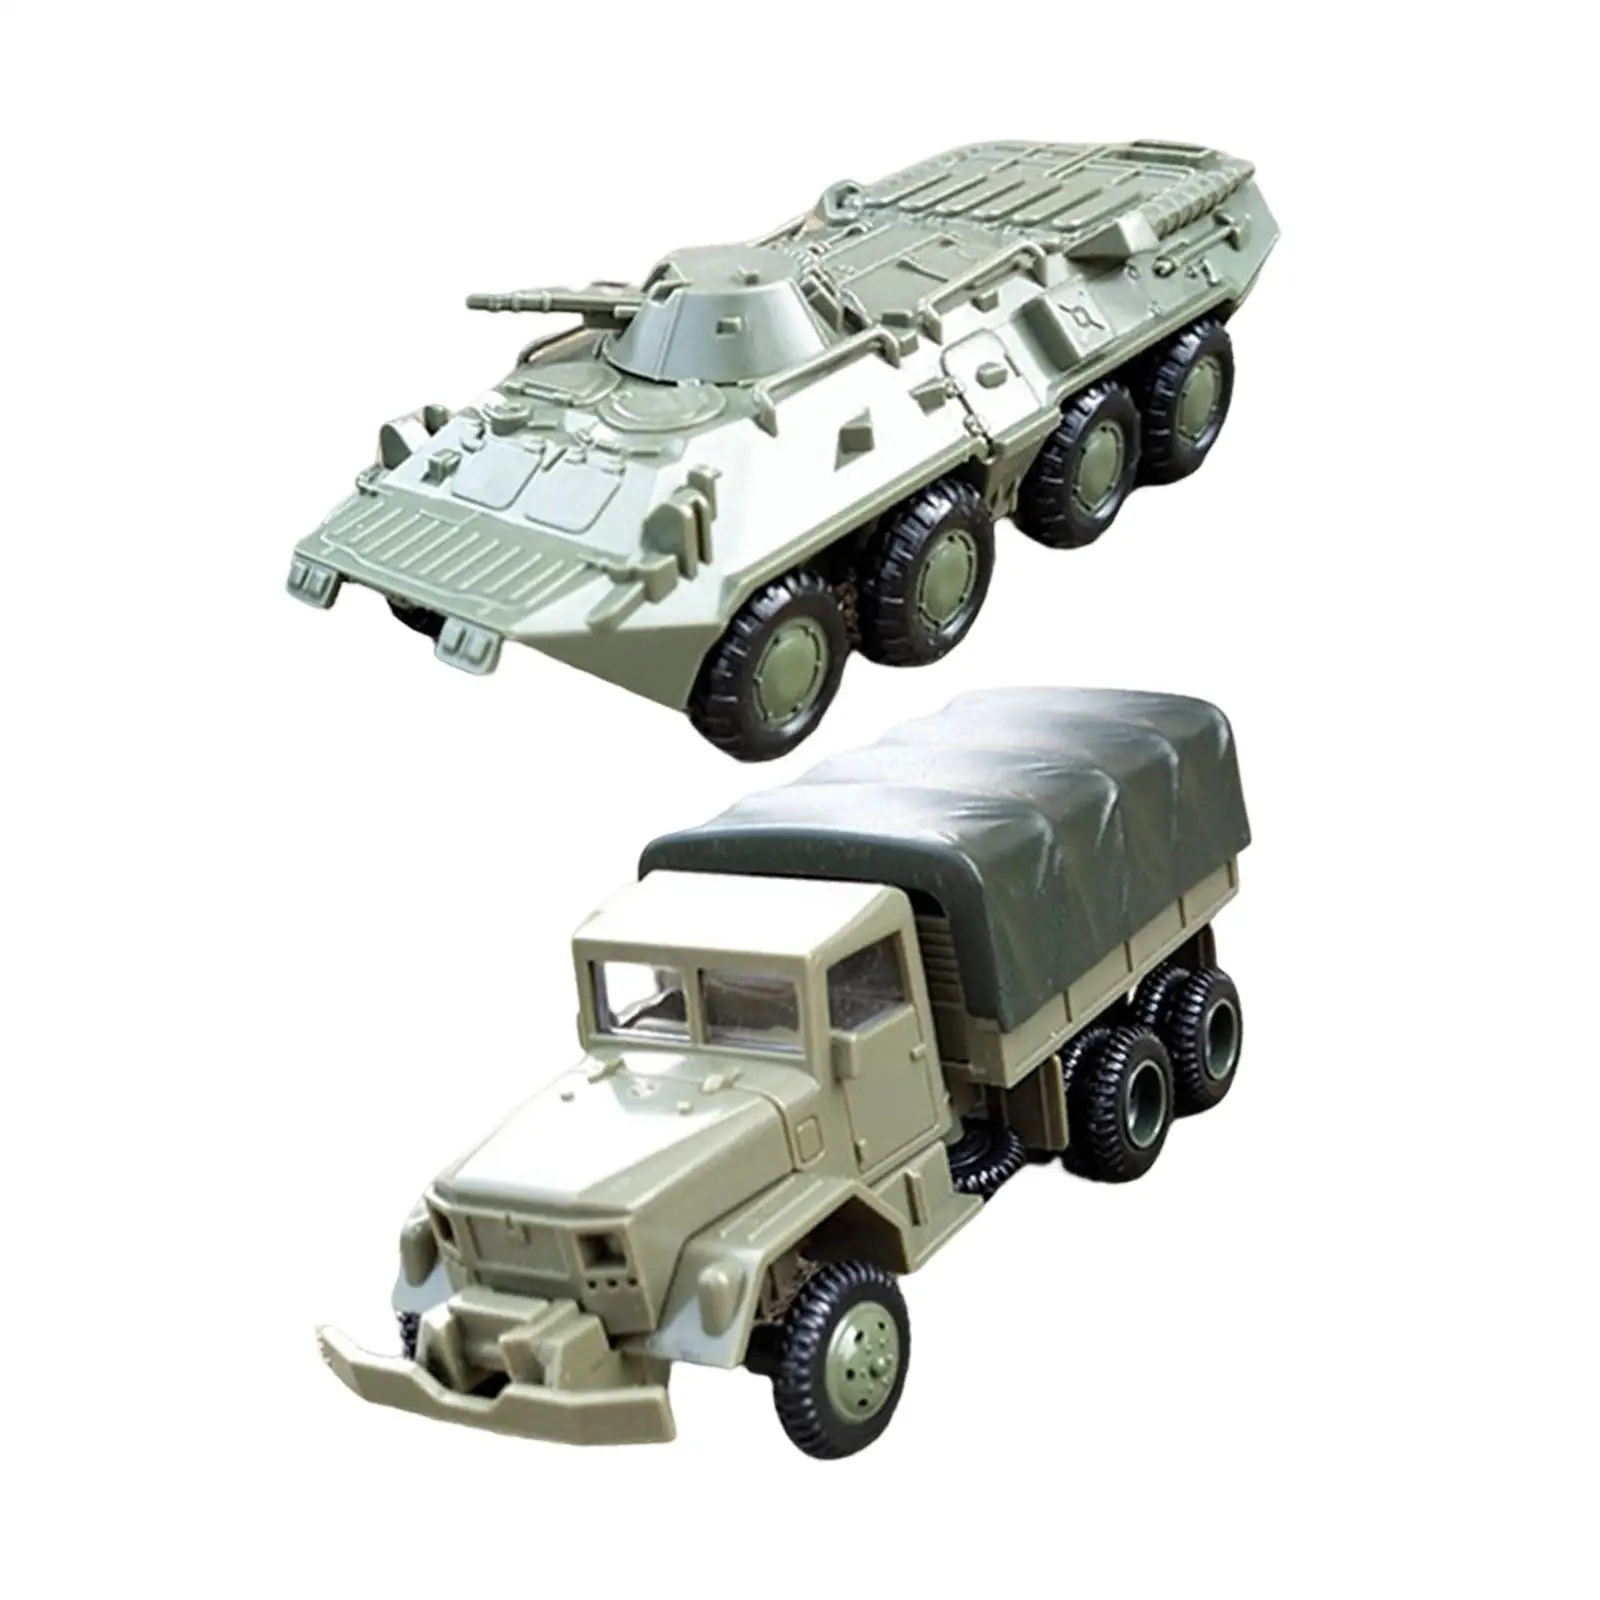 4D Trucks Table Model Toys Architecture Model Playset Collections Boy